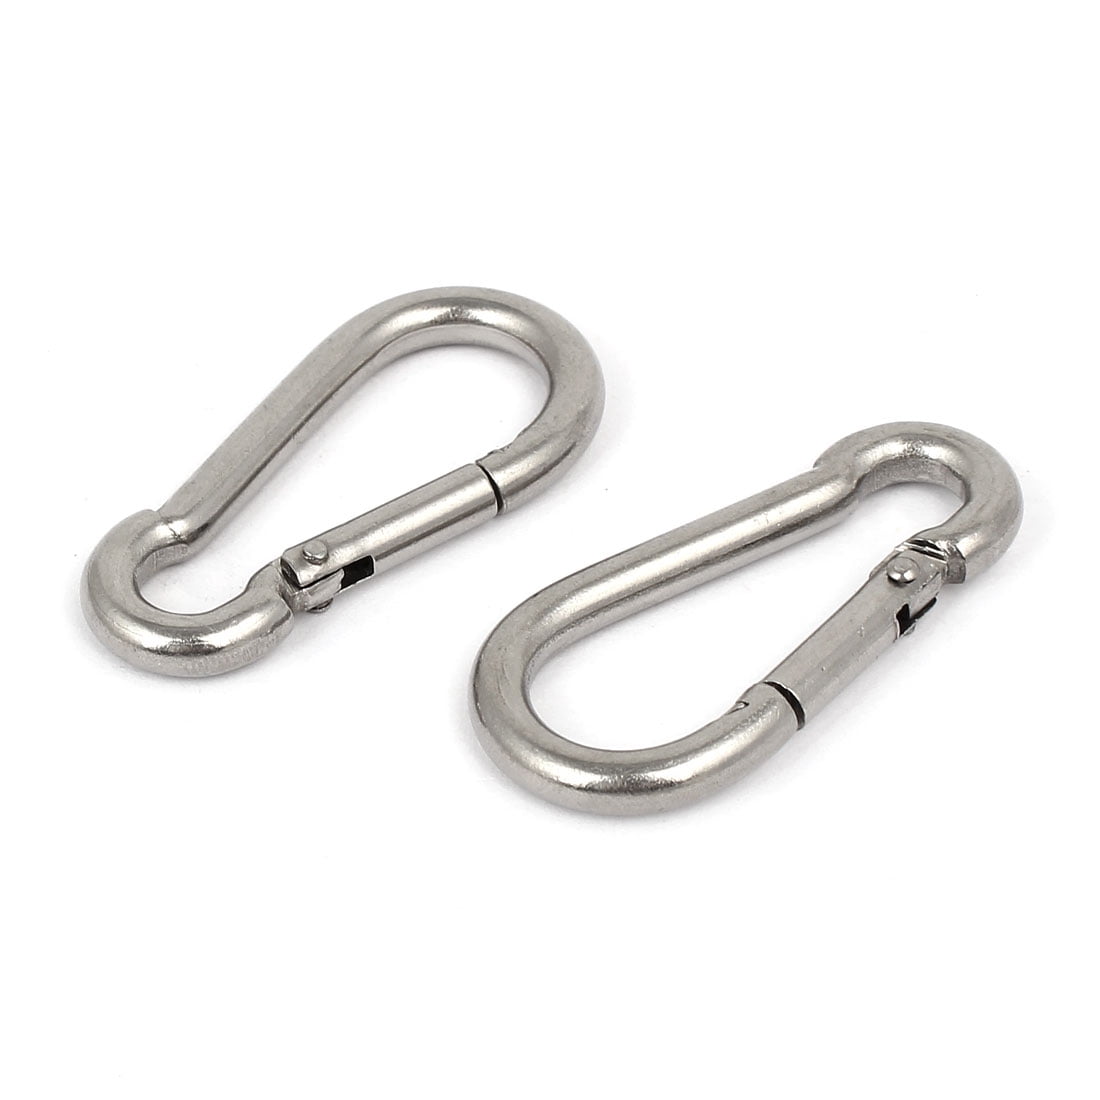 50mm  Stainless Steel Snap Spring Hook Keychain Hook Clip Leathercraft 